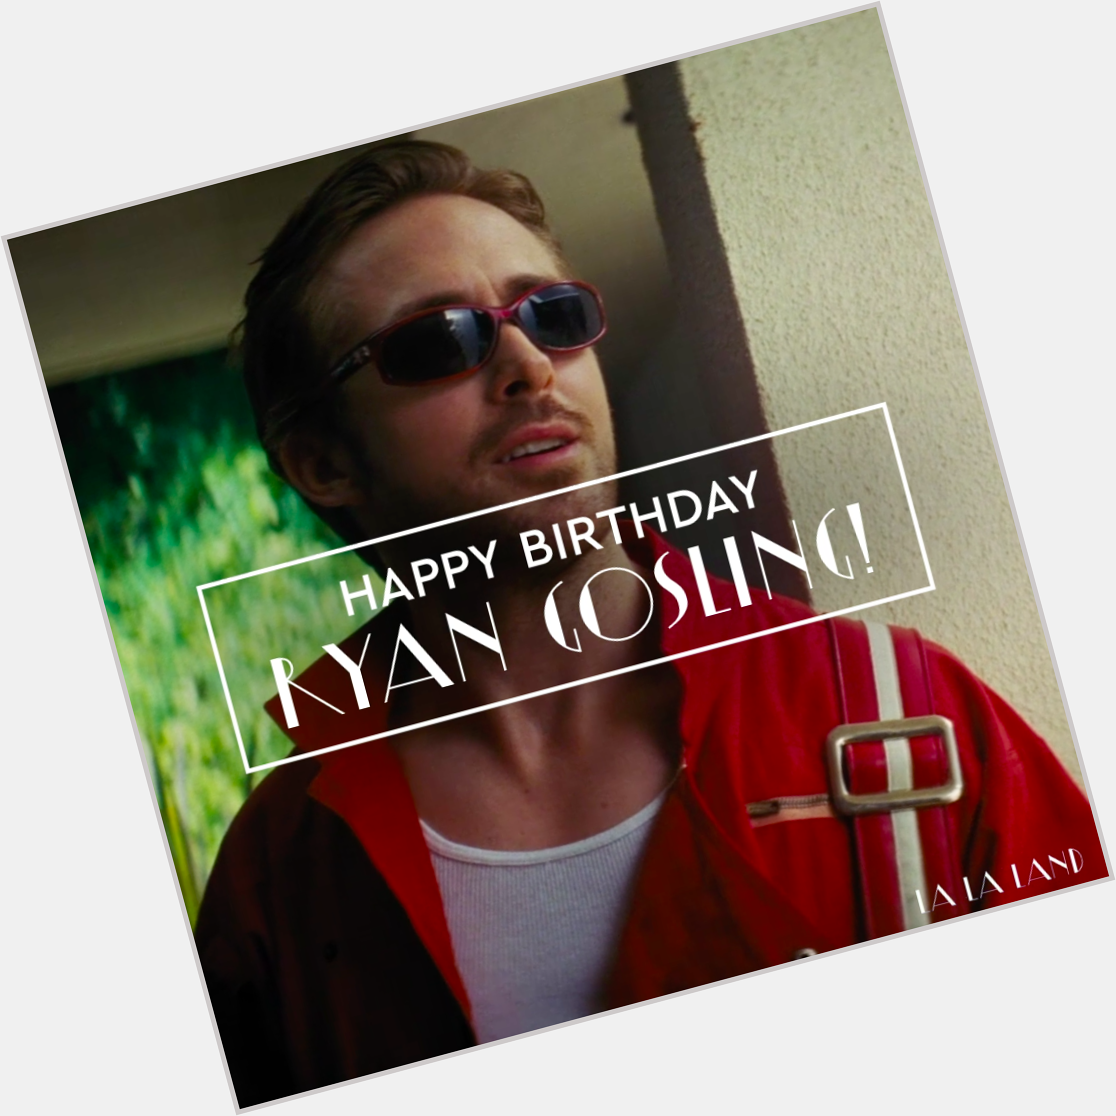 Happy Birthday Ryan Gosling! We d like to dedicate this next song to you.  